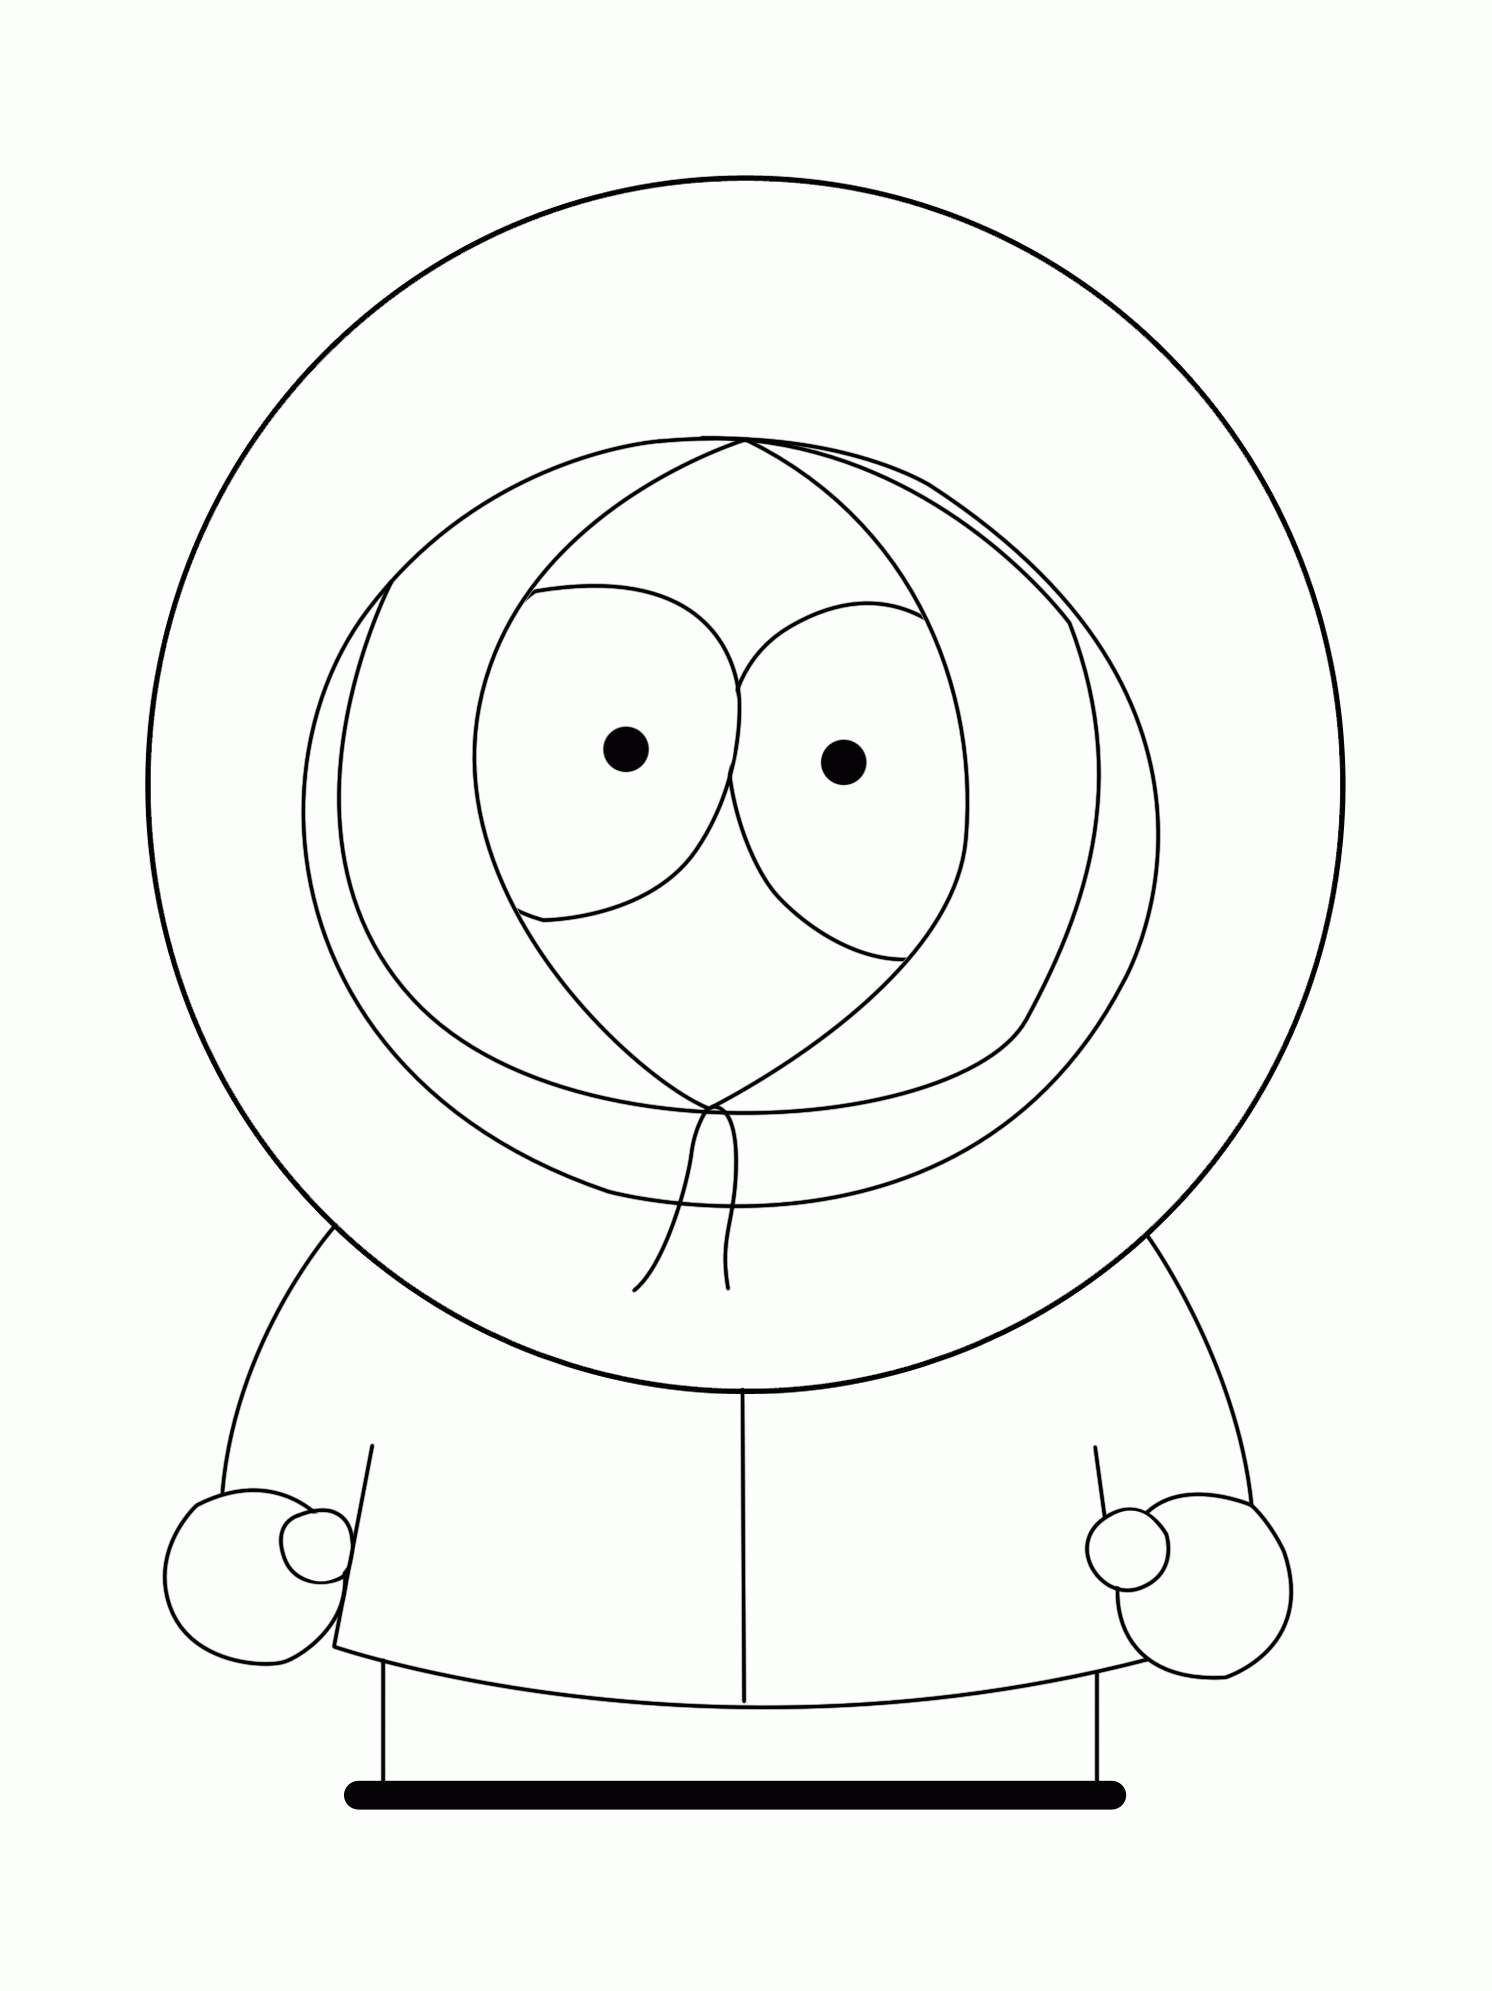 South Park Coloring Page - Coloring Home - Free Printable South Park Coloring Pages